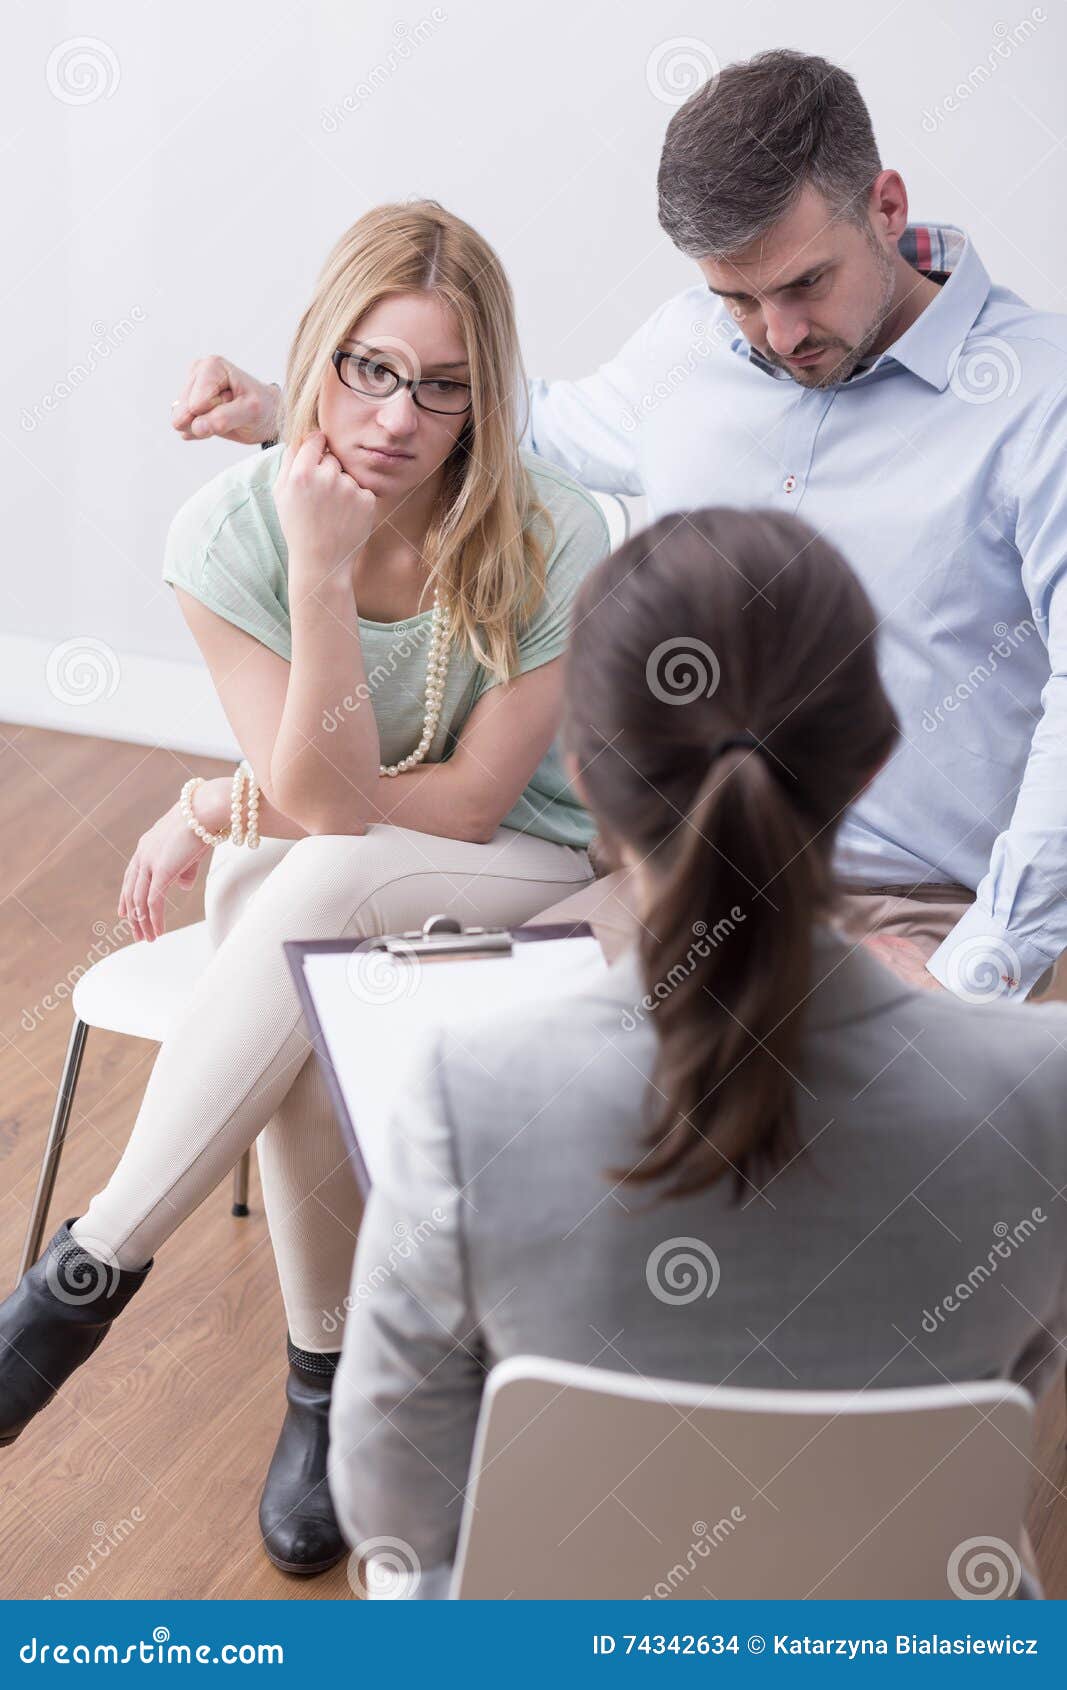 Seeking Professional Help During Times Of Trouble Stock Photo - Image